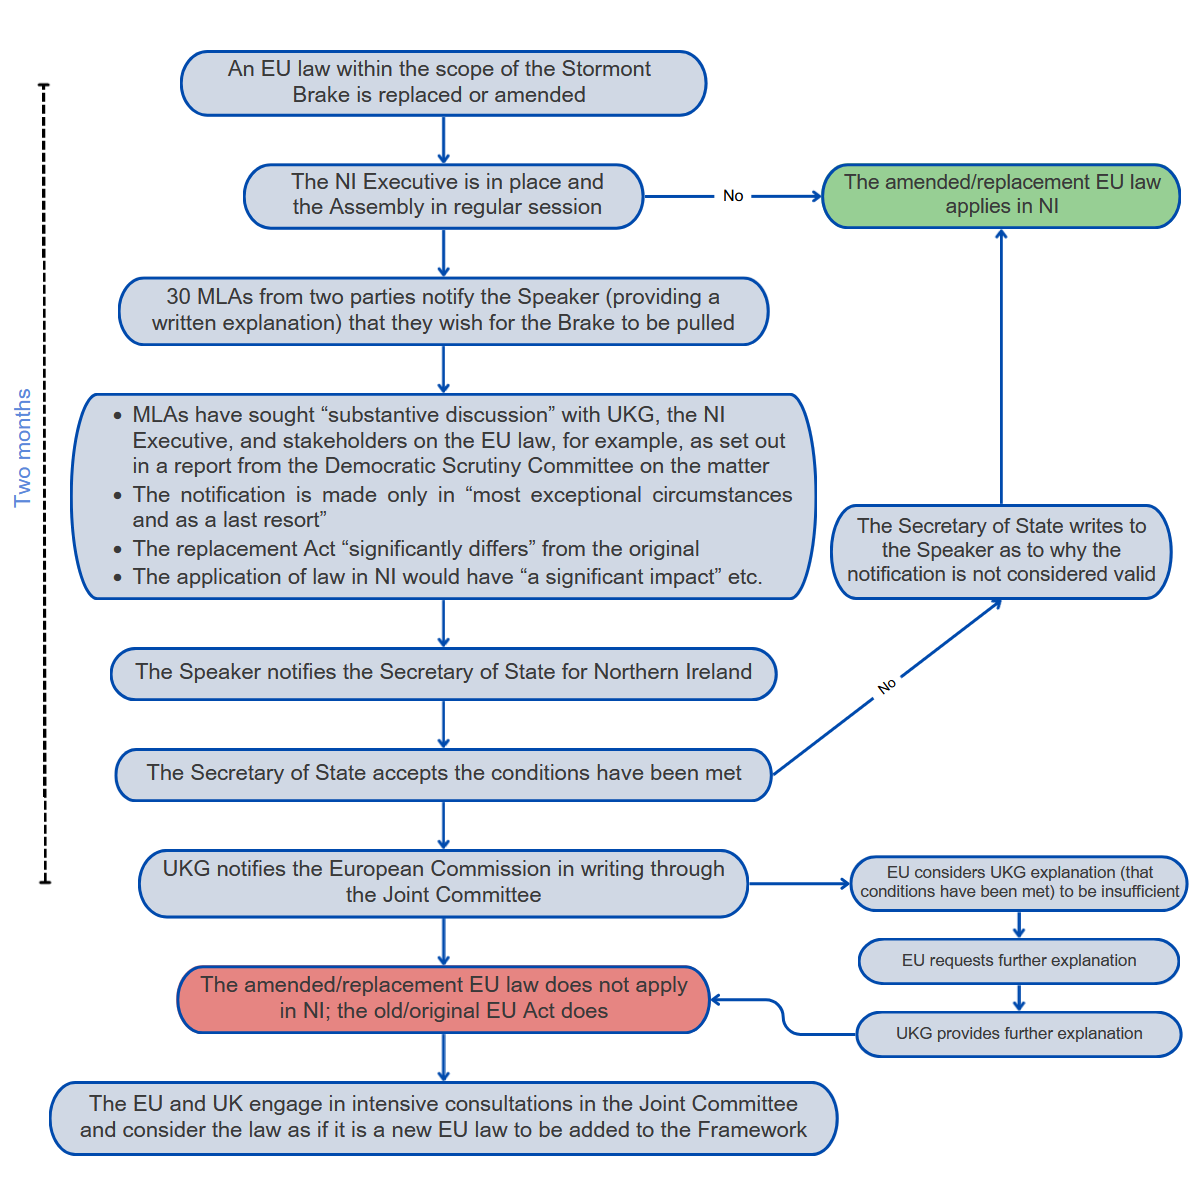 A flowchart of the Stormont Brake process, as set out in the text above